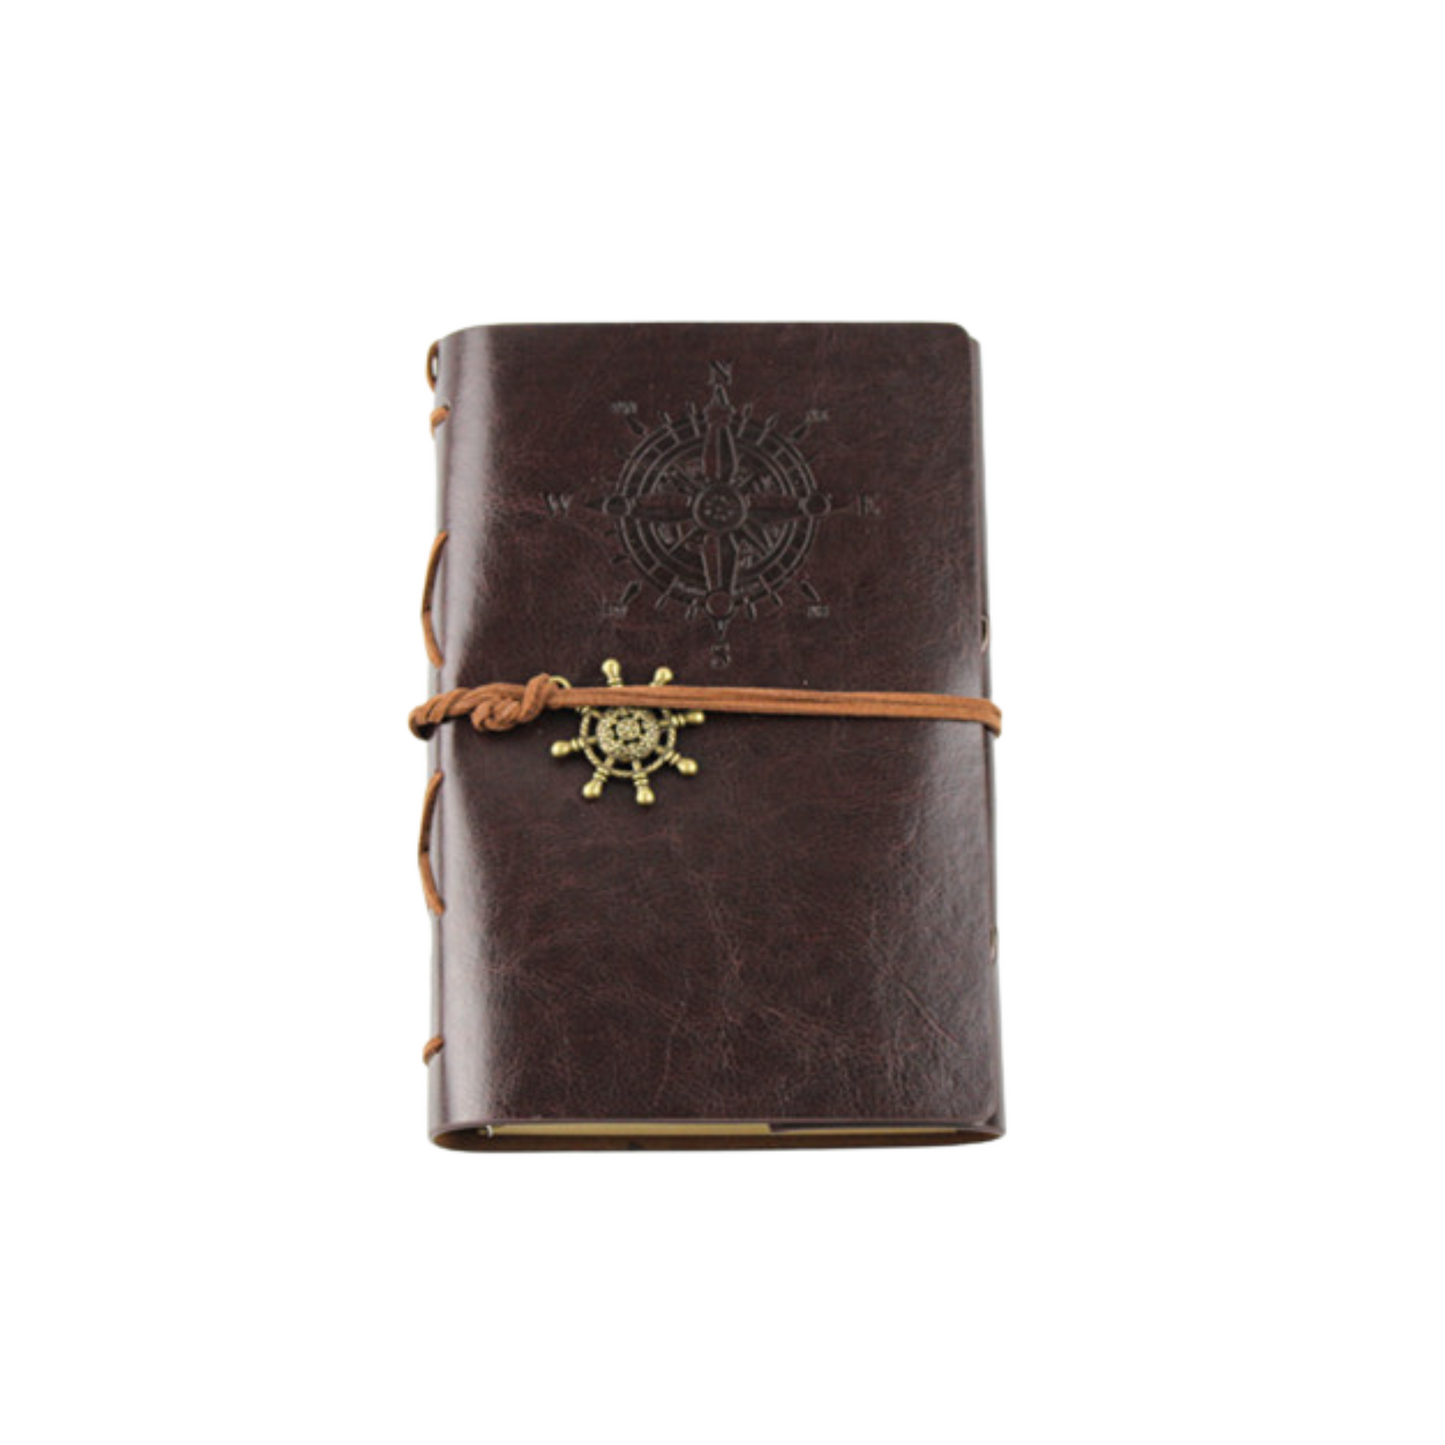 Genuine Leather Bound Journal Travel Diary Note Sketch Book